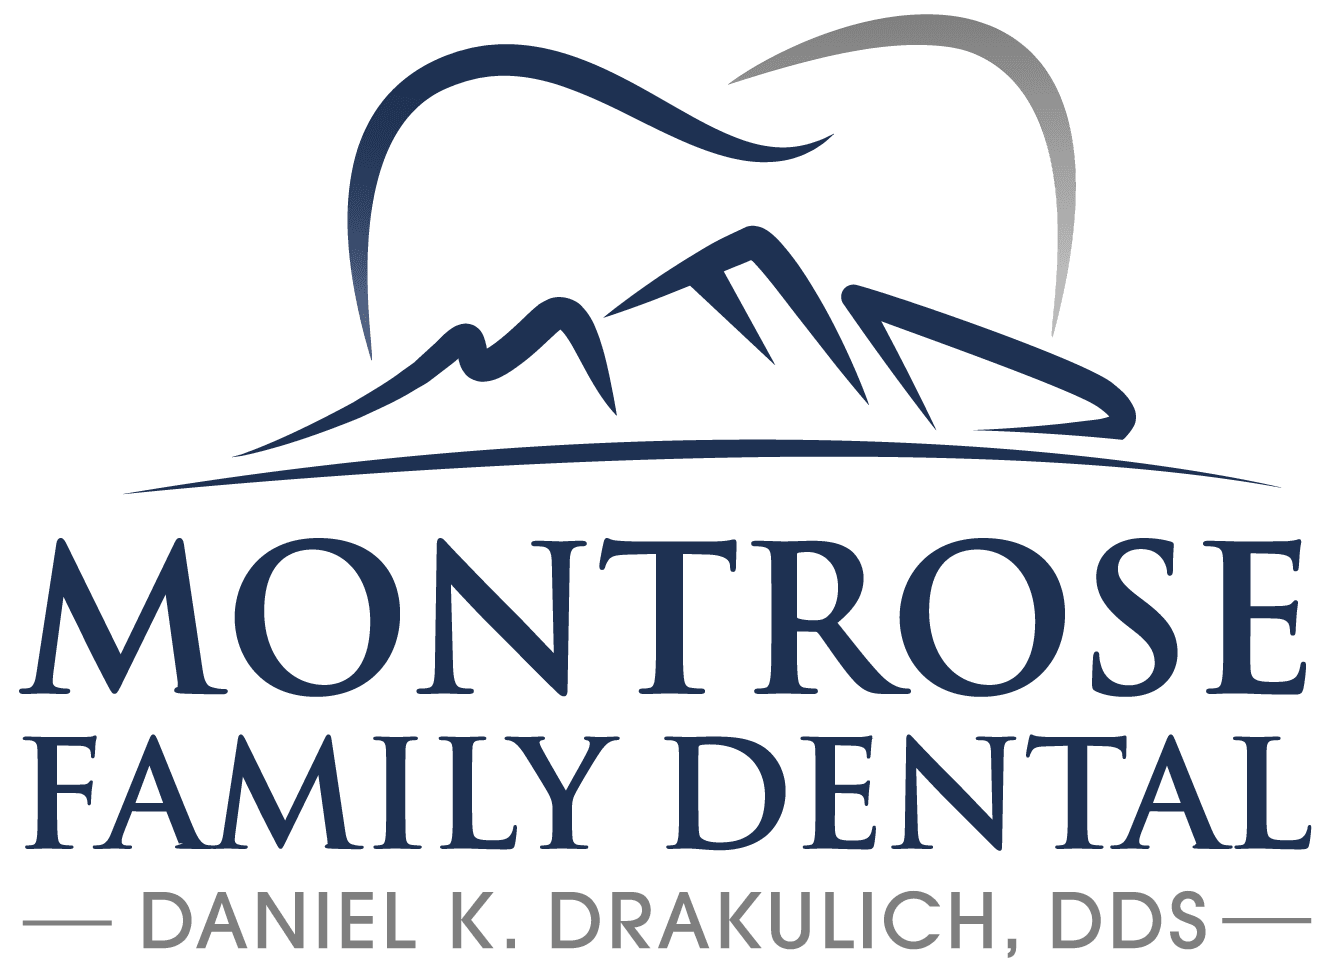 Montrose Family Dental - Dentist office in downtown Montrose CO serving families of the Western Slope.